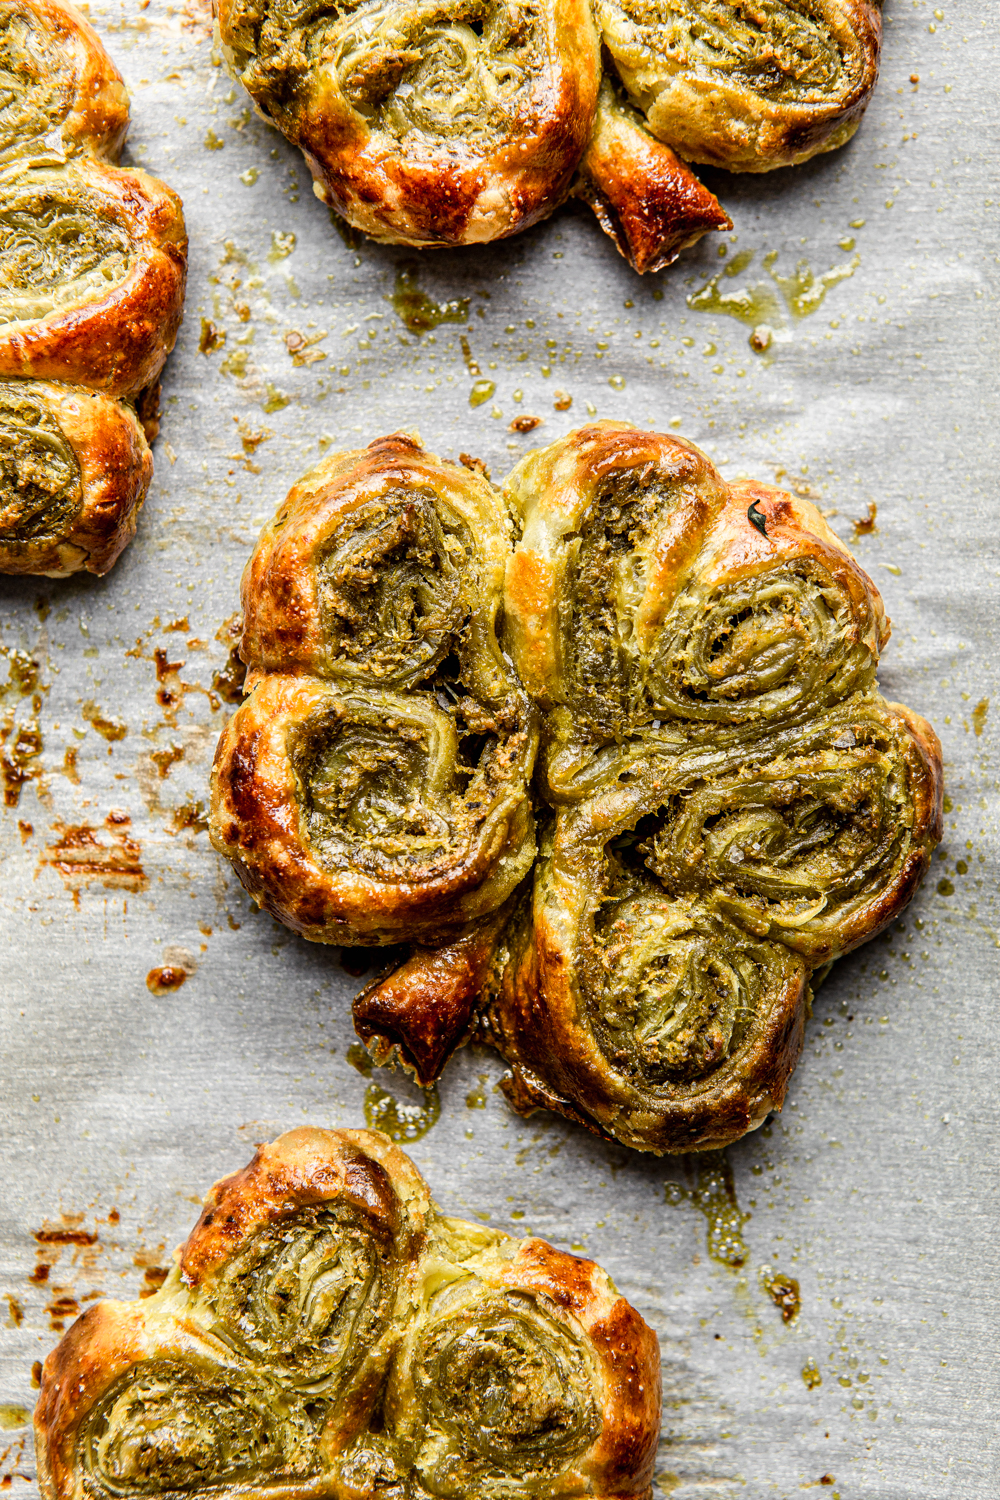 shamrocks made out of puff pastry and basil pesto